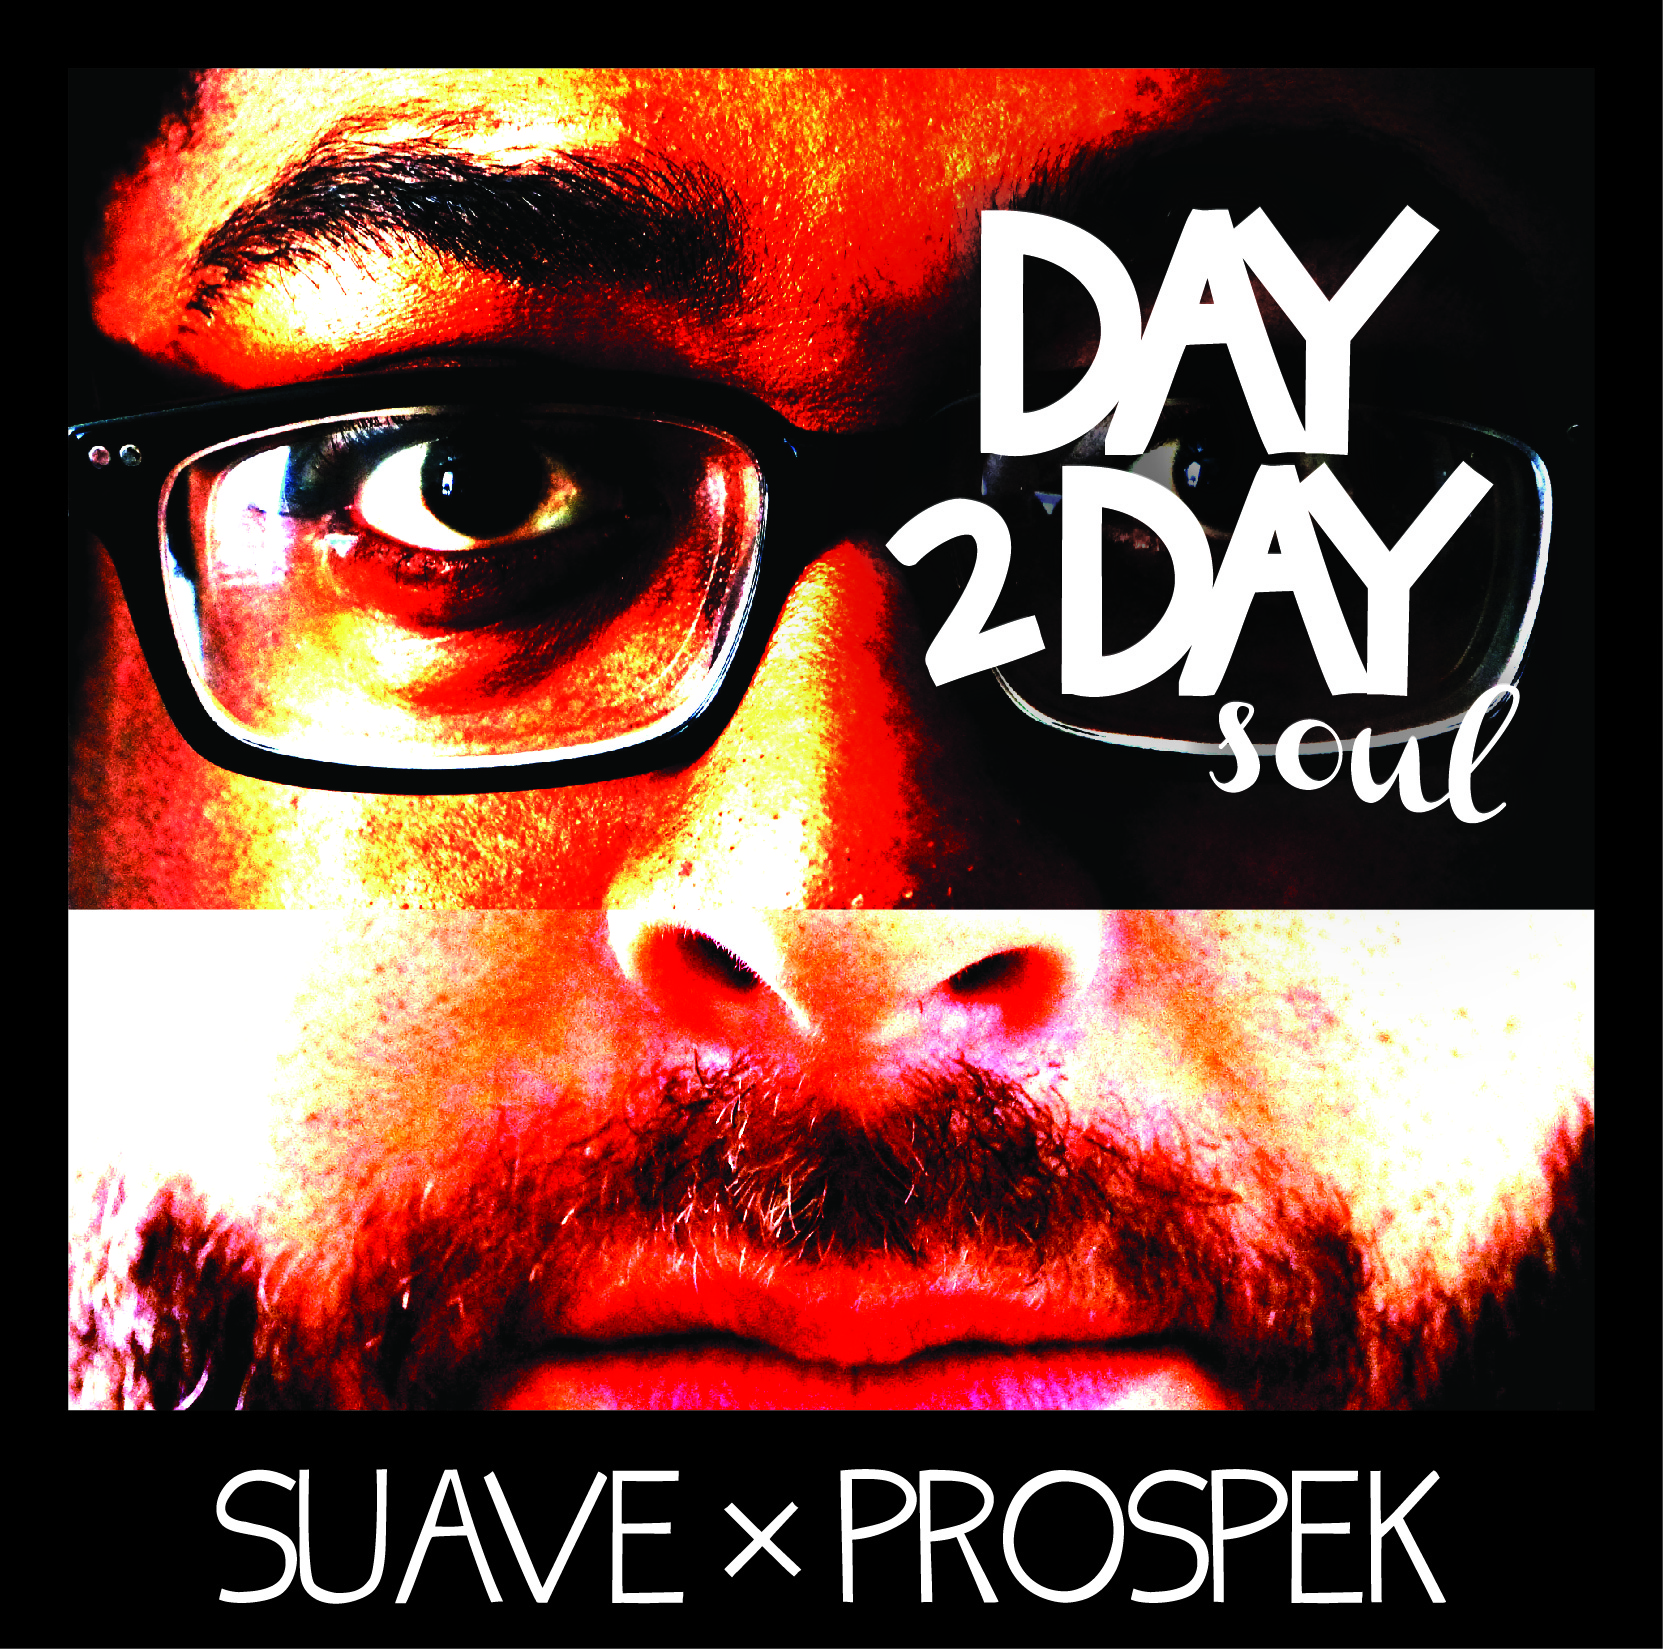 Free Download: Suave & Prospek – Day 2 Day Soul EP